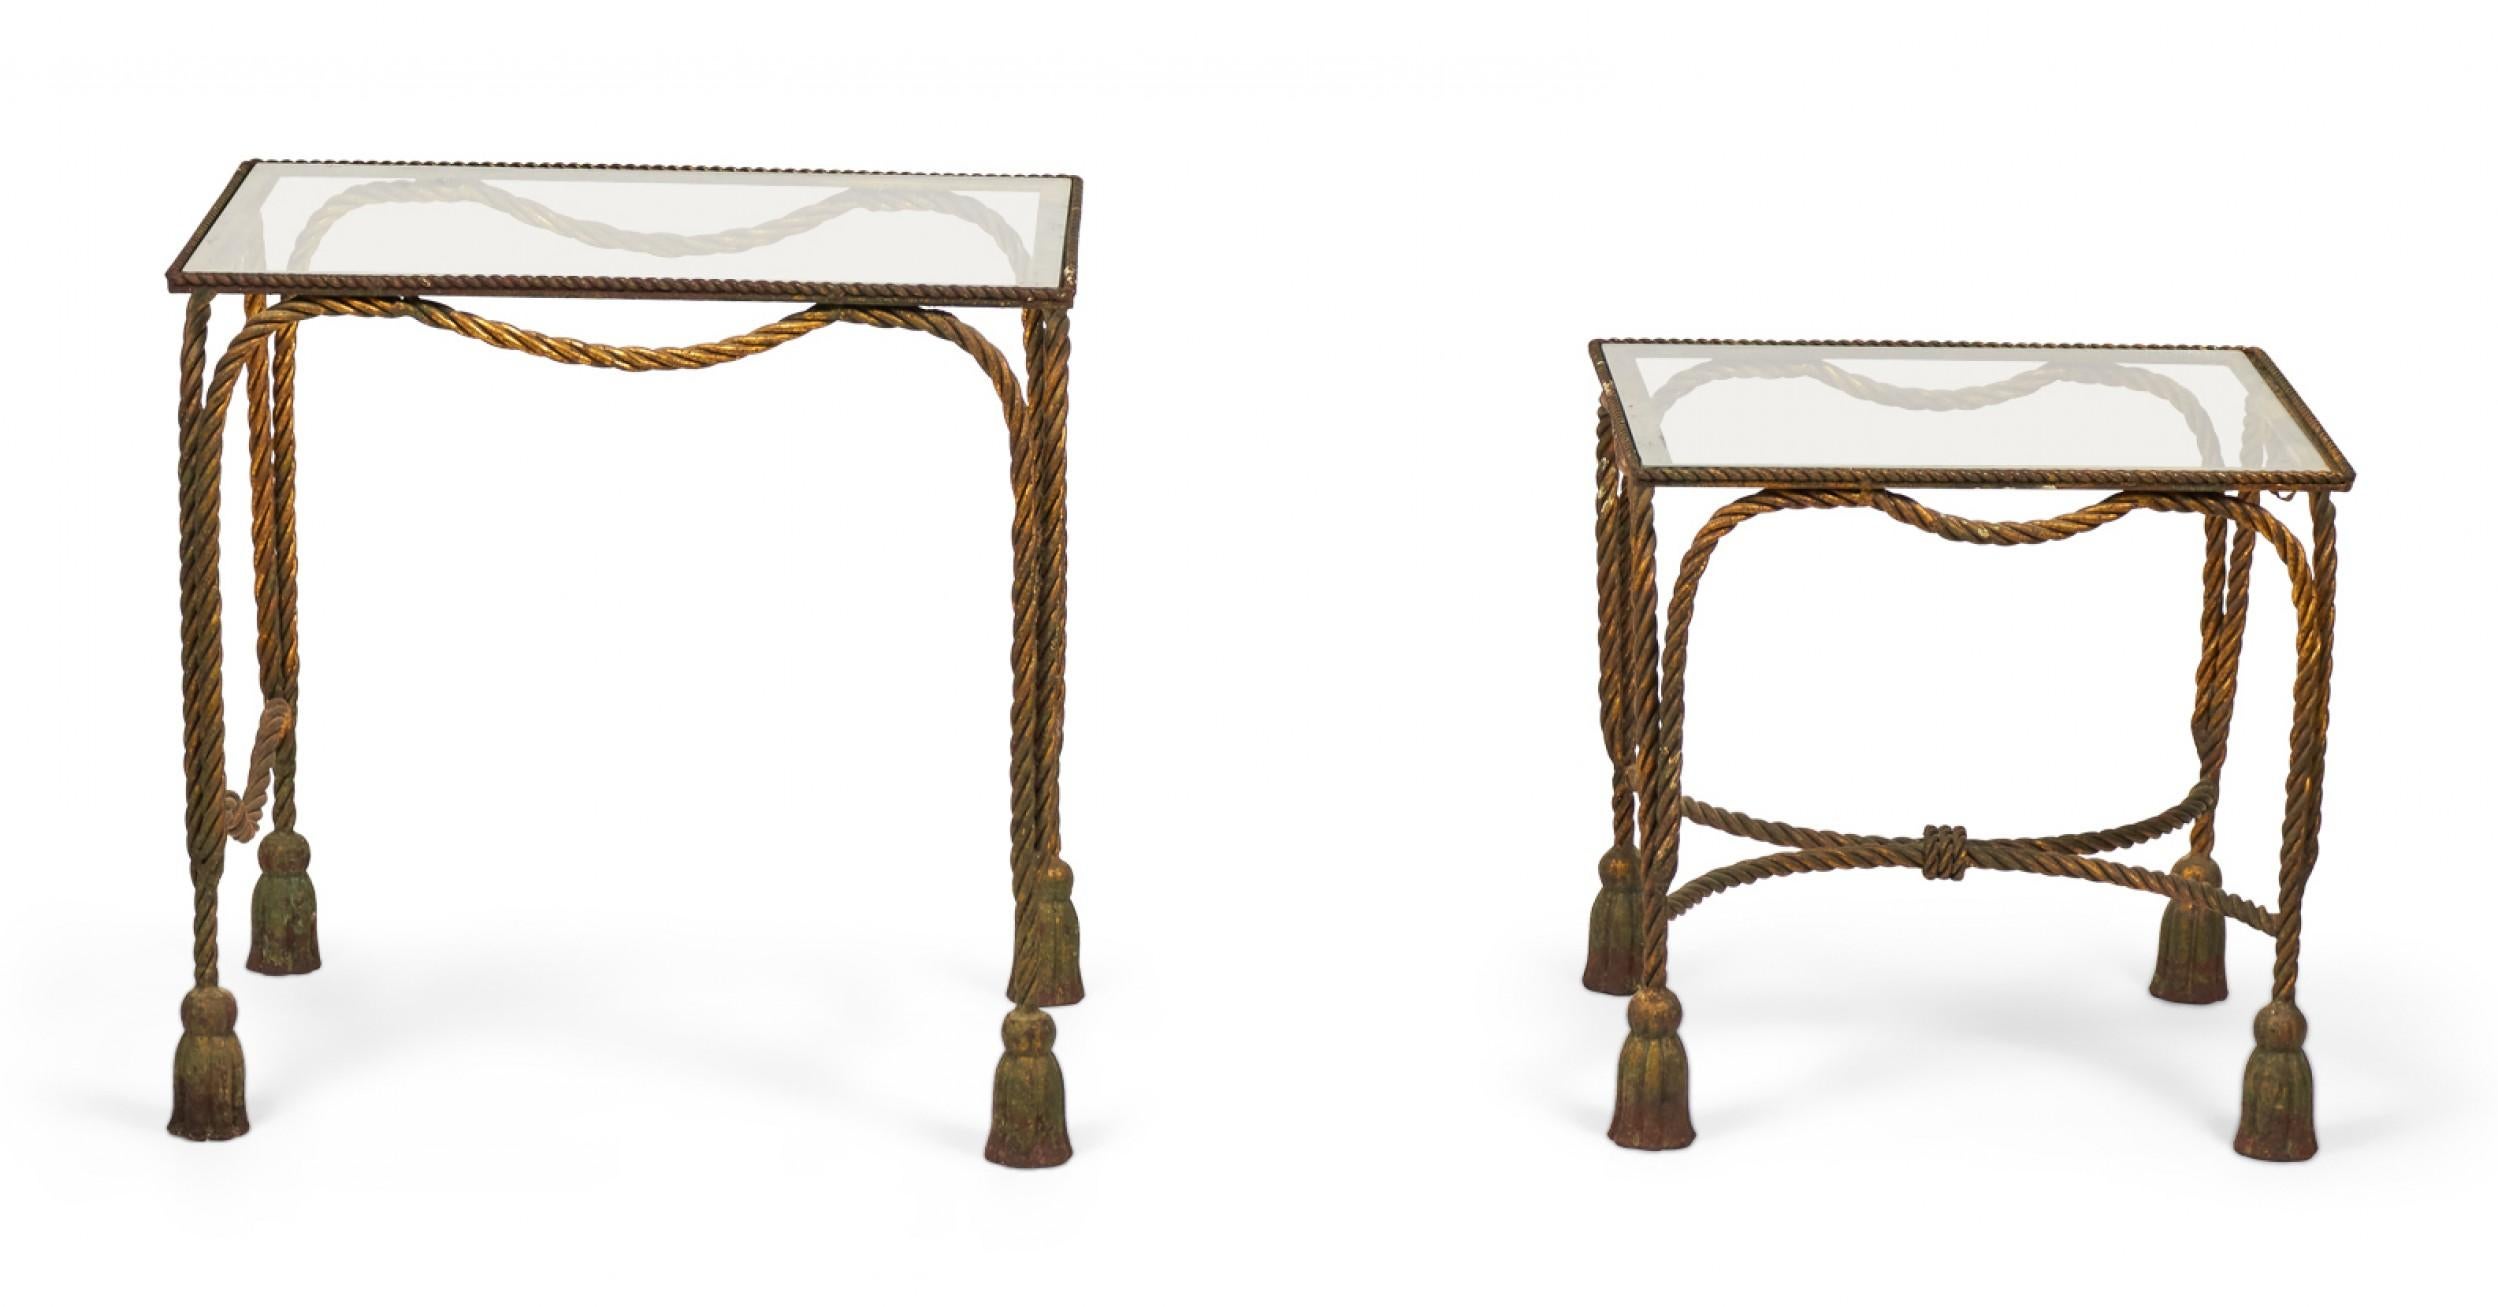 Italian Baroque-Style Mid-Century (circa 1950) Rope and Tassel nesting tables with gilt iron frames and clear glass table tops. (two tables, PRICED AS SET) (PALLADIO, ITALY)